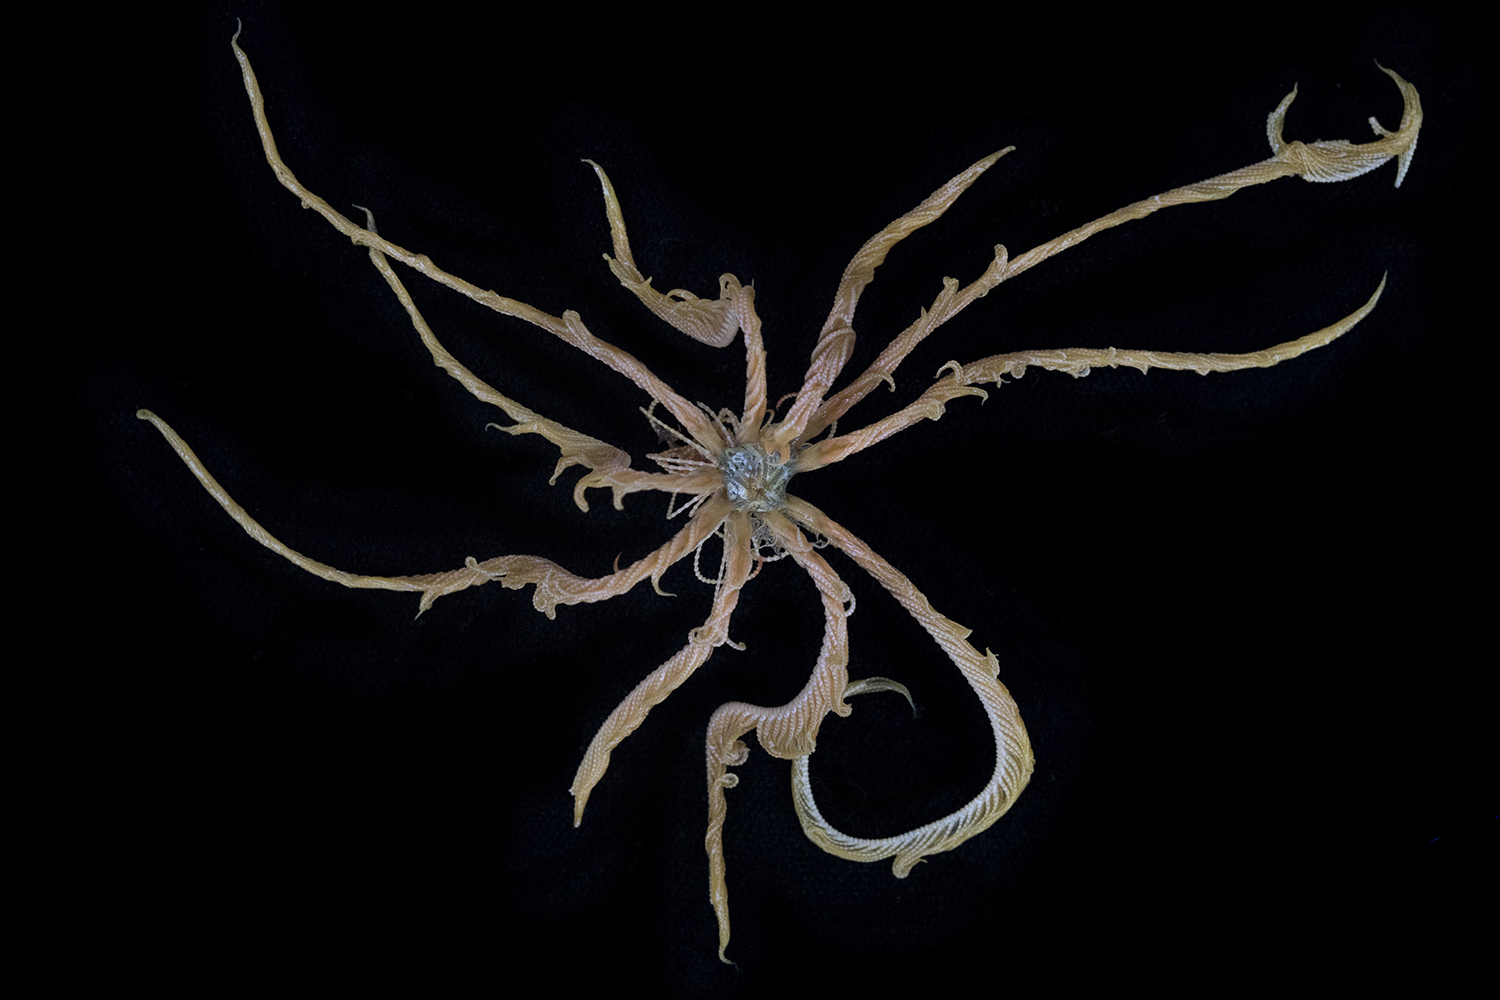 A comatulid feather star collected from a submarine dive off Brabant Island (Gerlache Strait, Antarctic Peninsula) at around 420 meters depth.